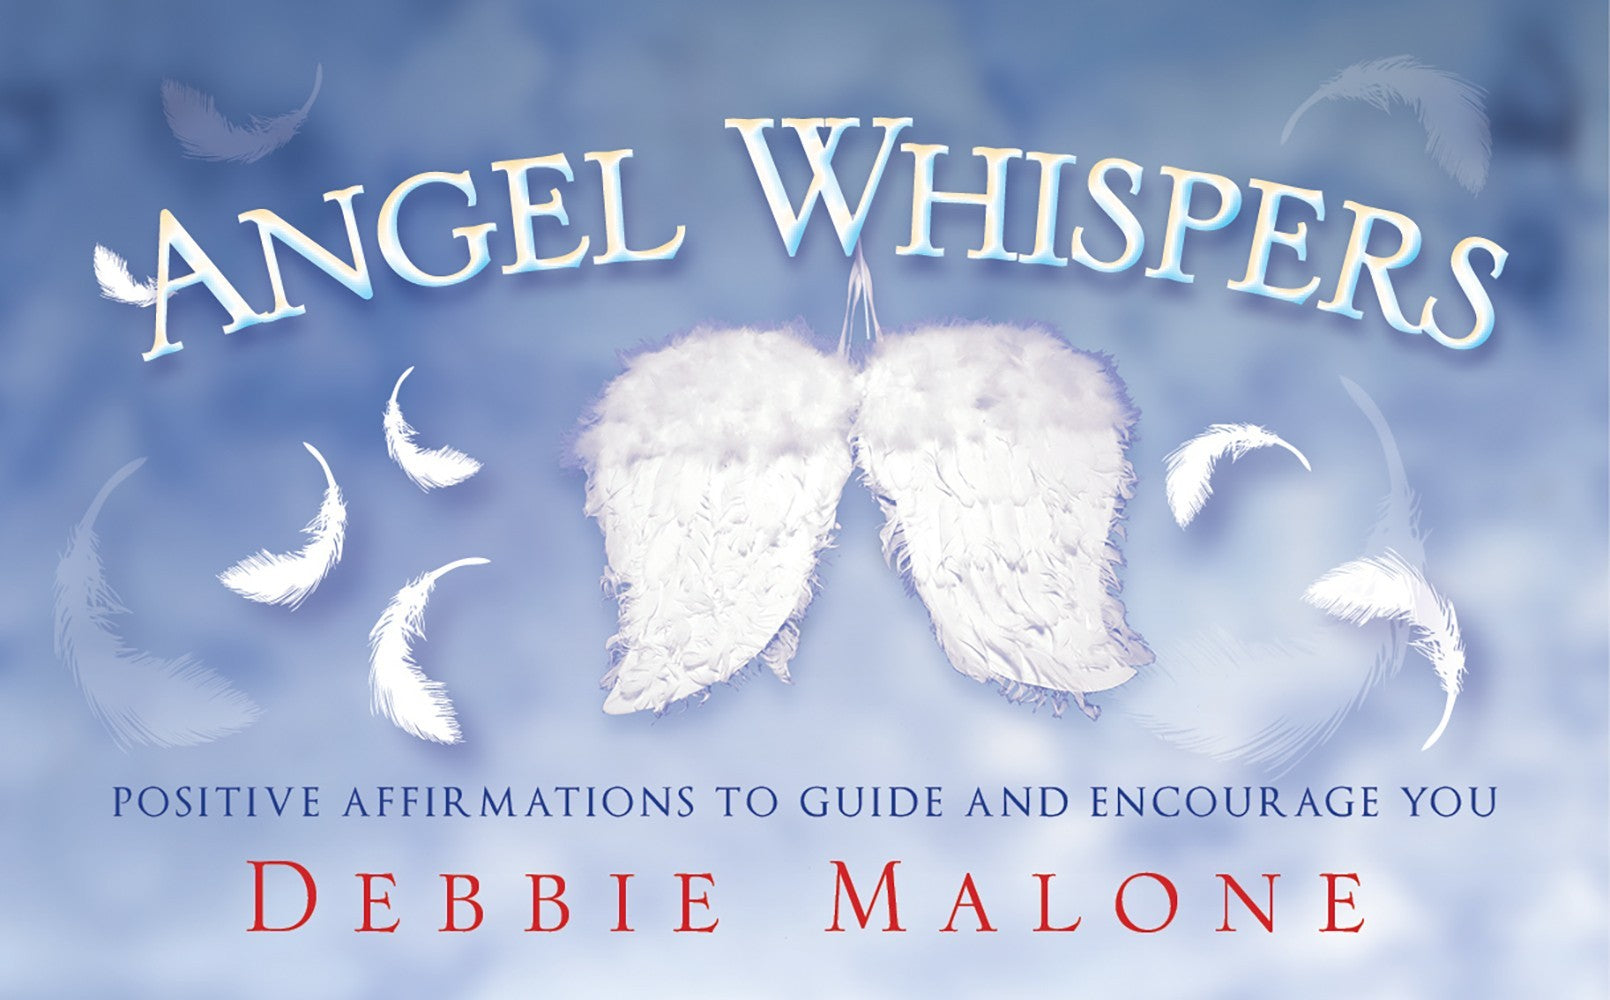 Angel Whispers Cards